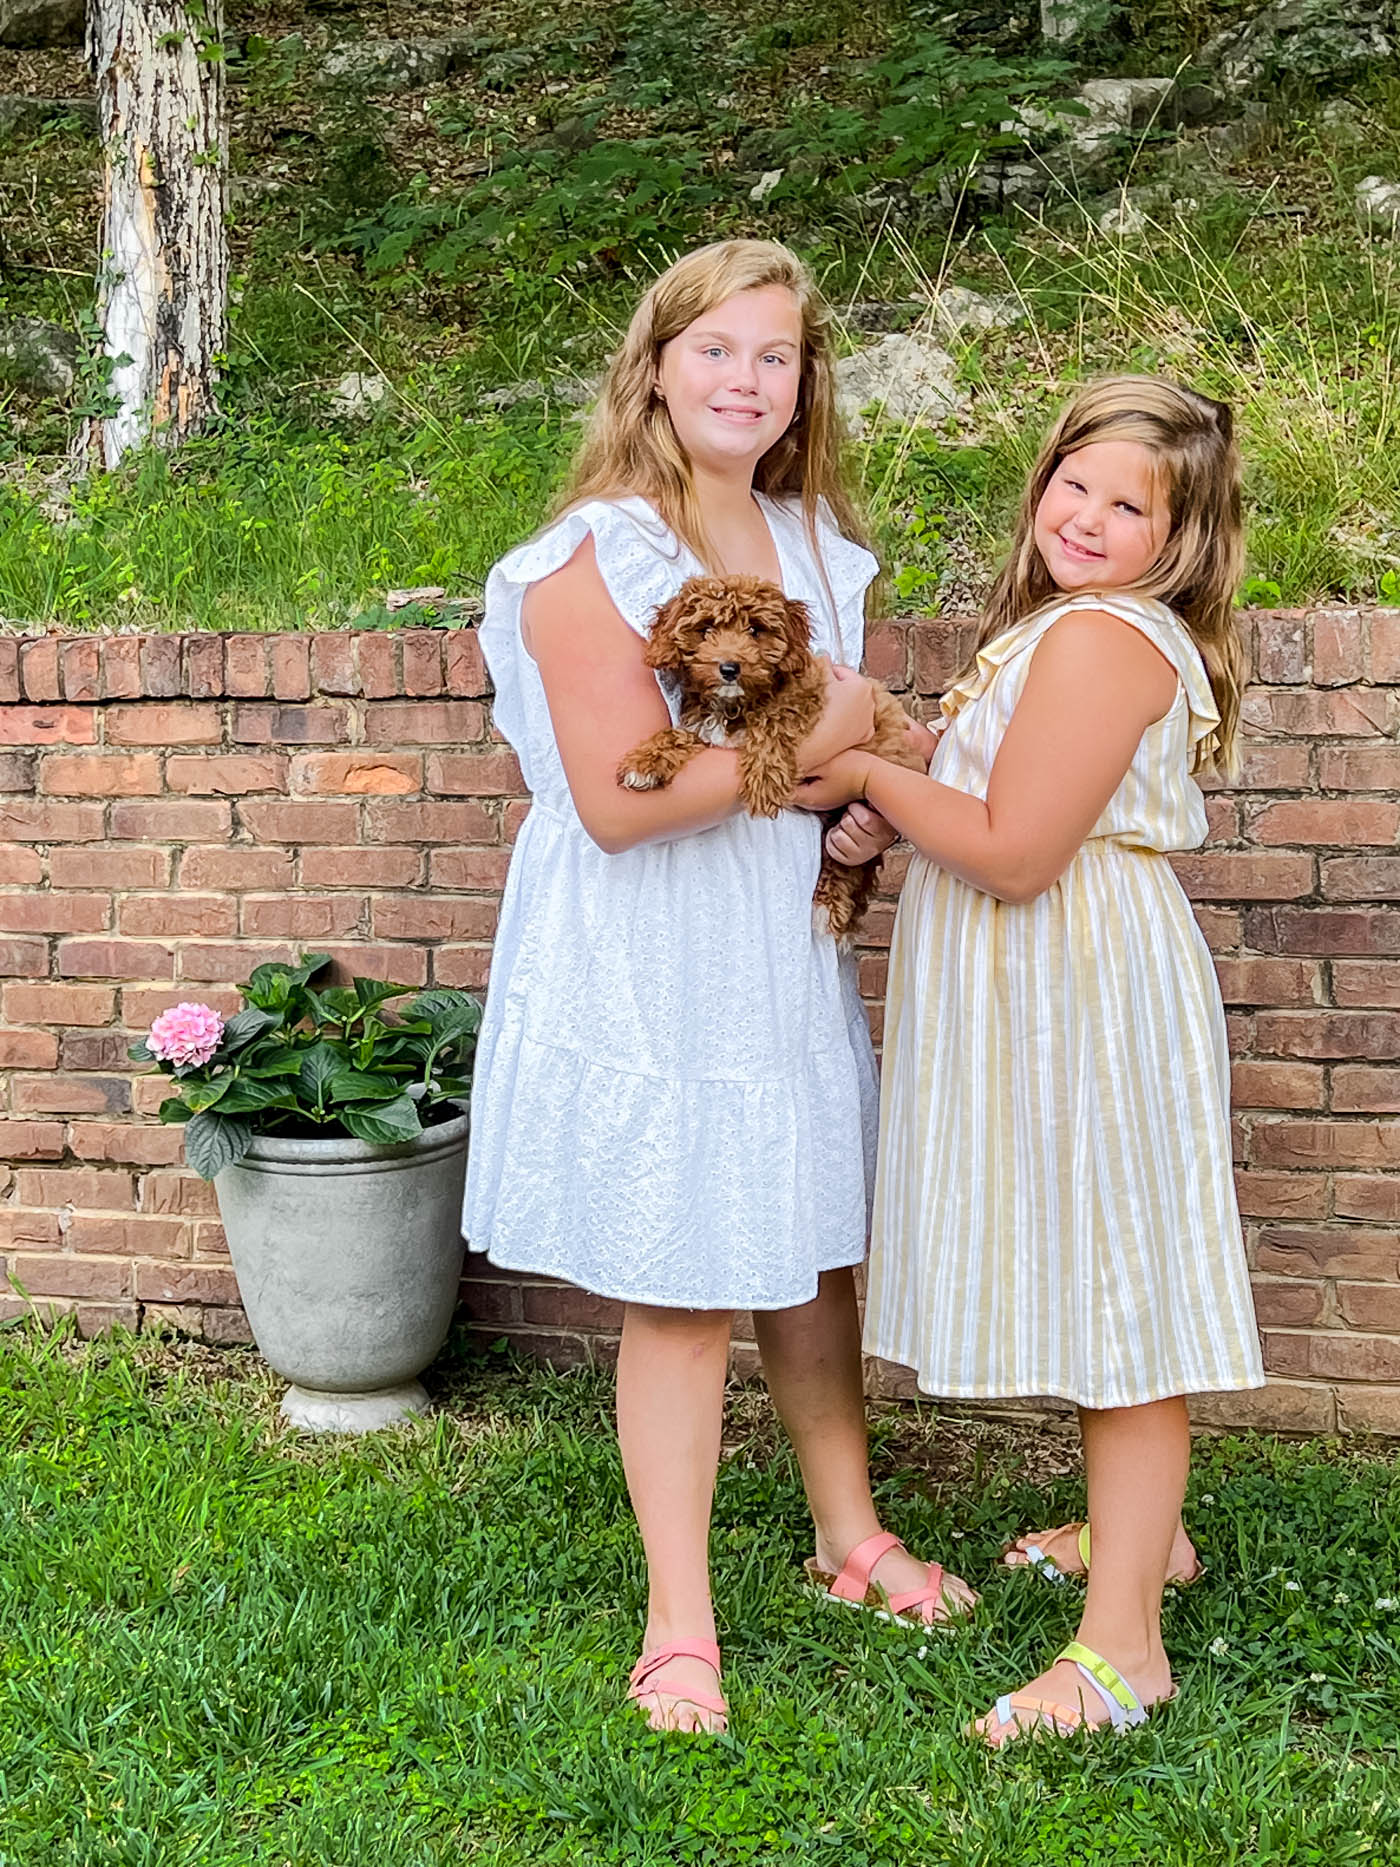 Cavapoo puppy and girls